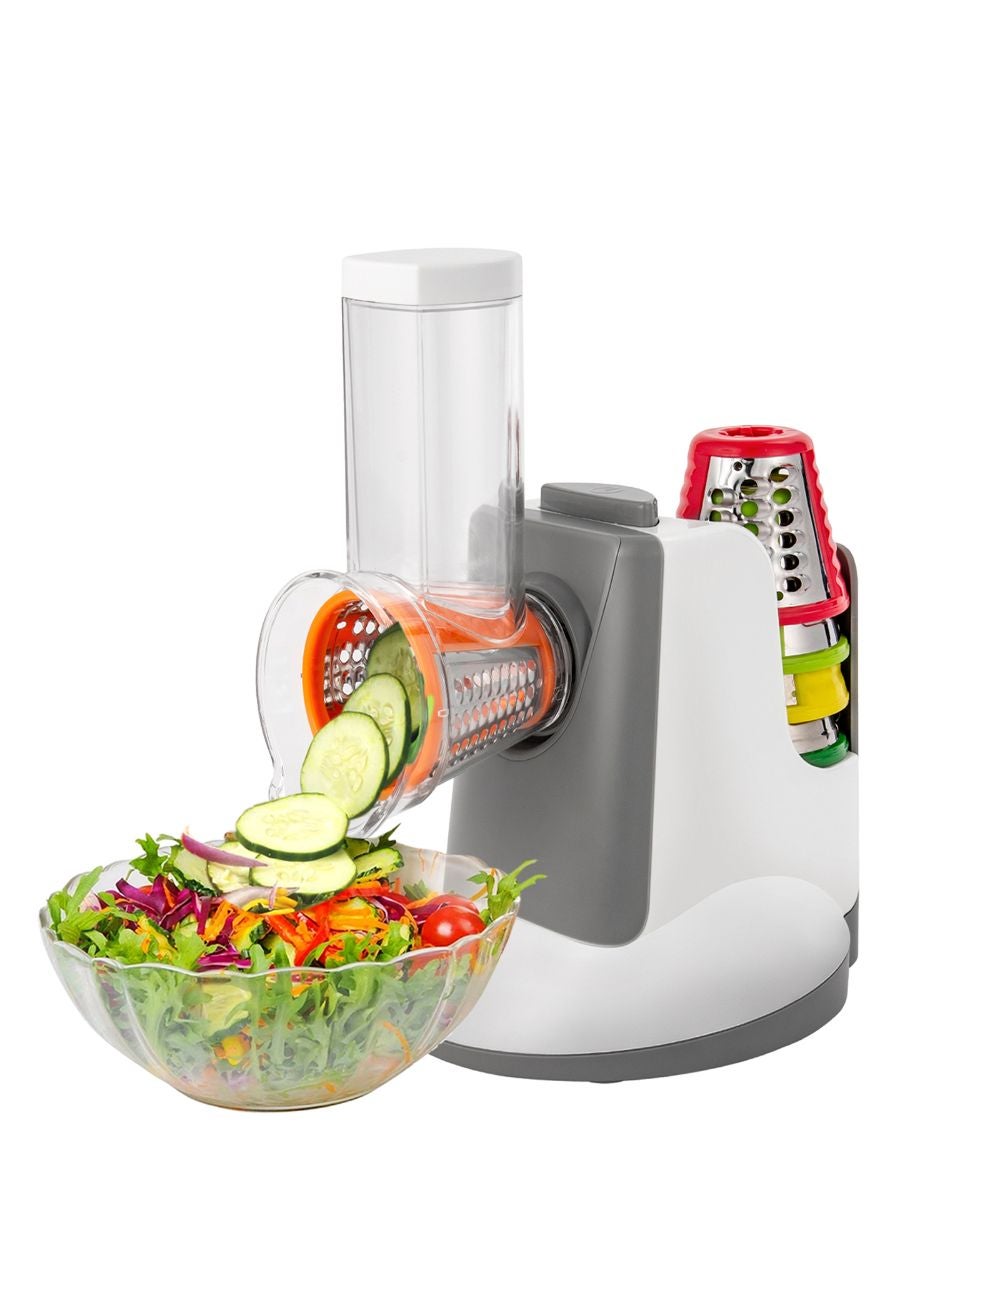 Salad Maker Deluxe *CLOSEOUT*Eterna PG93860